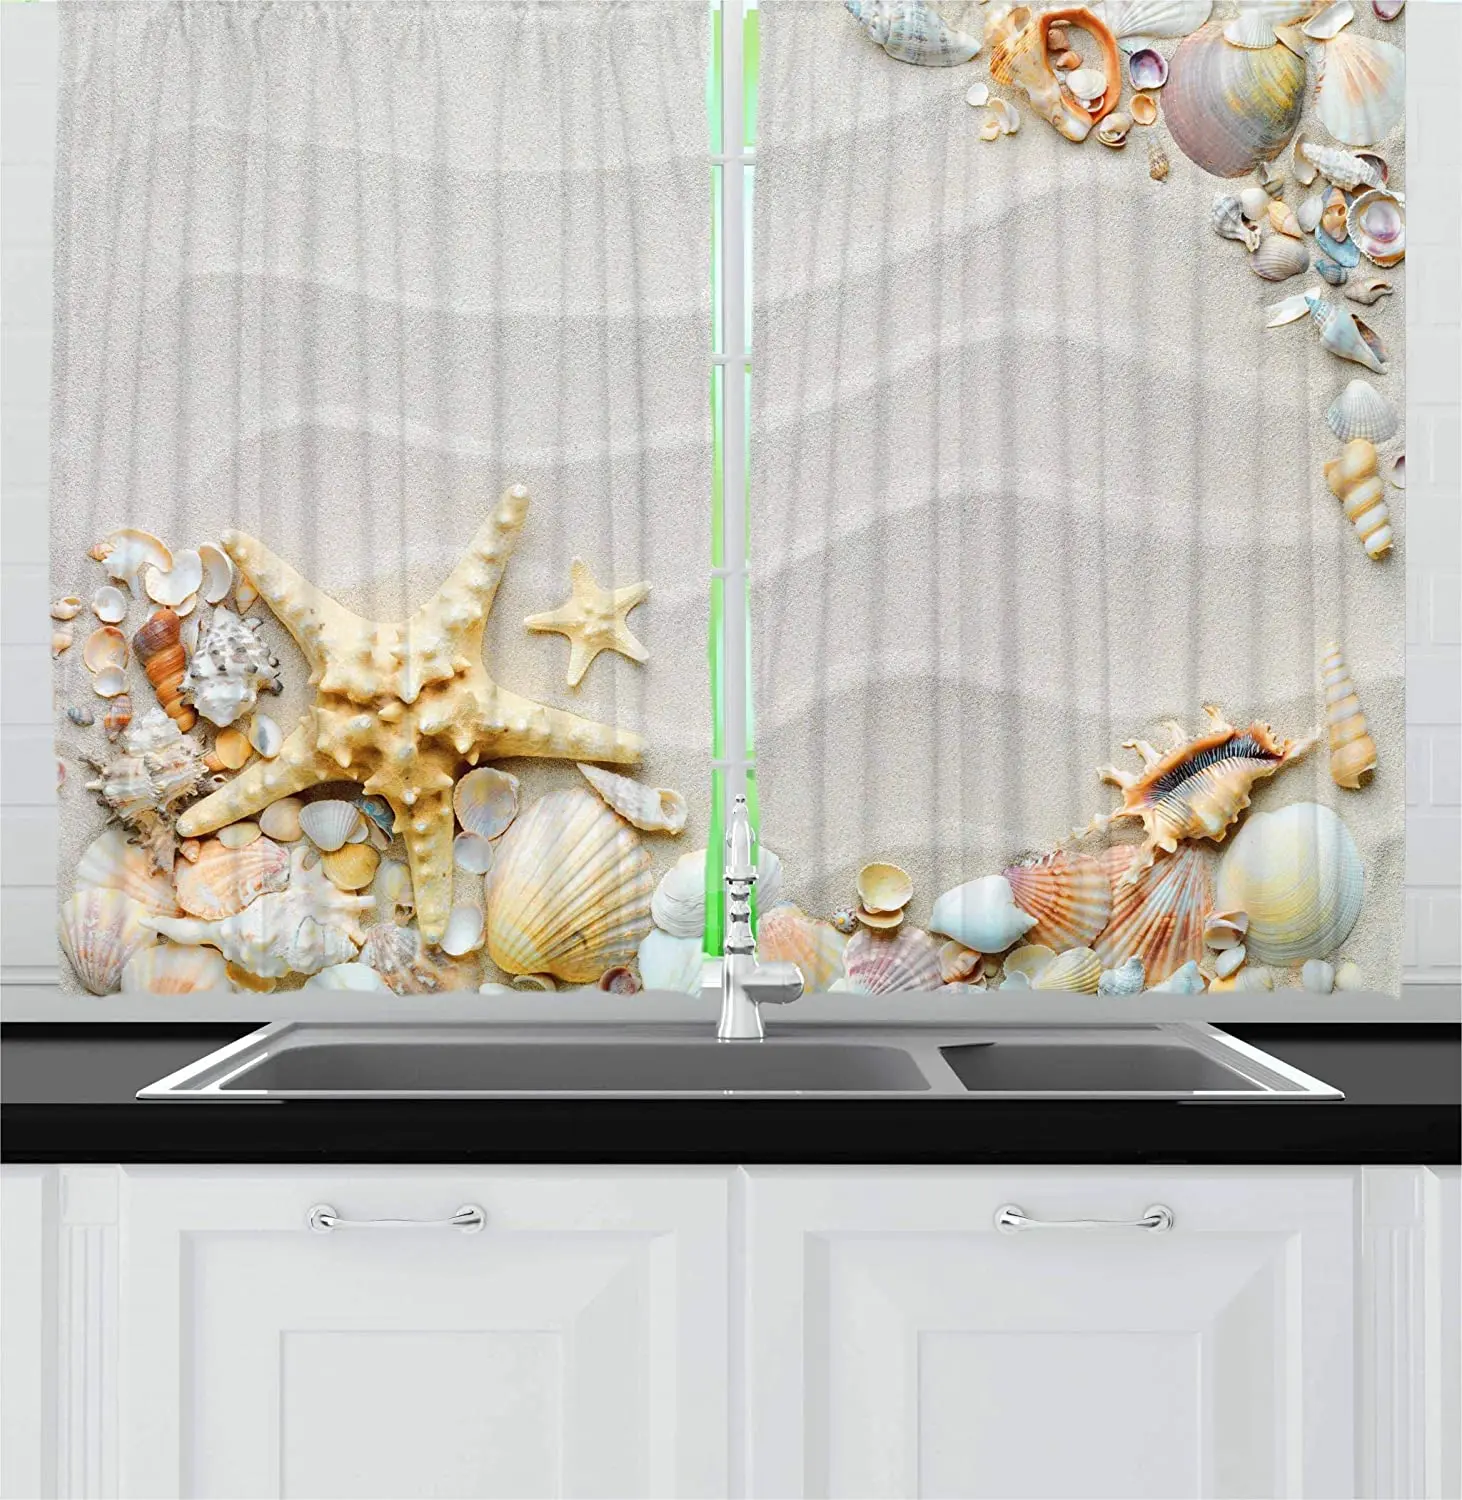 

Seacoast with Sand Colorful Various Seashells Tropics Aquatic Wildlife Theme Window Drapes Blackout Curtains for Kitchen Cafe